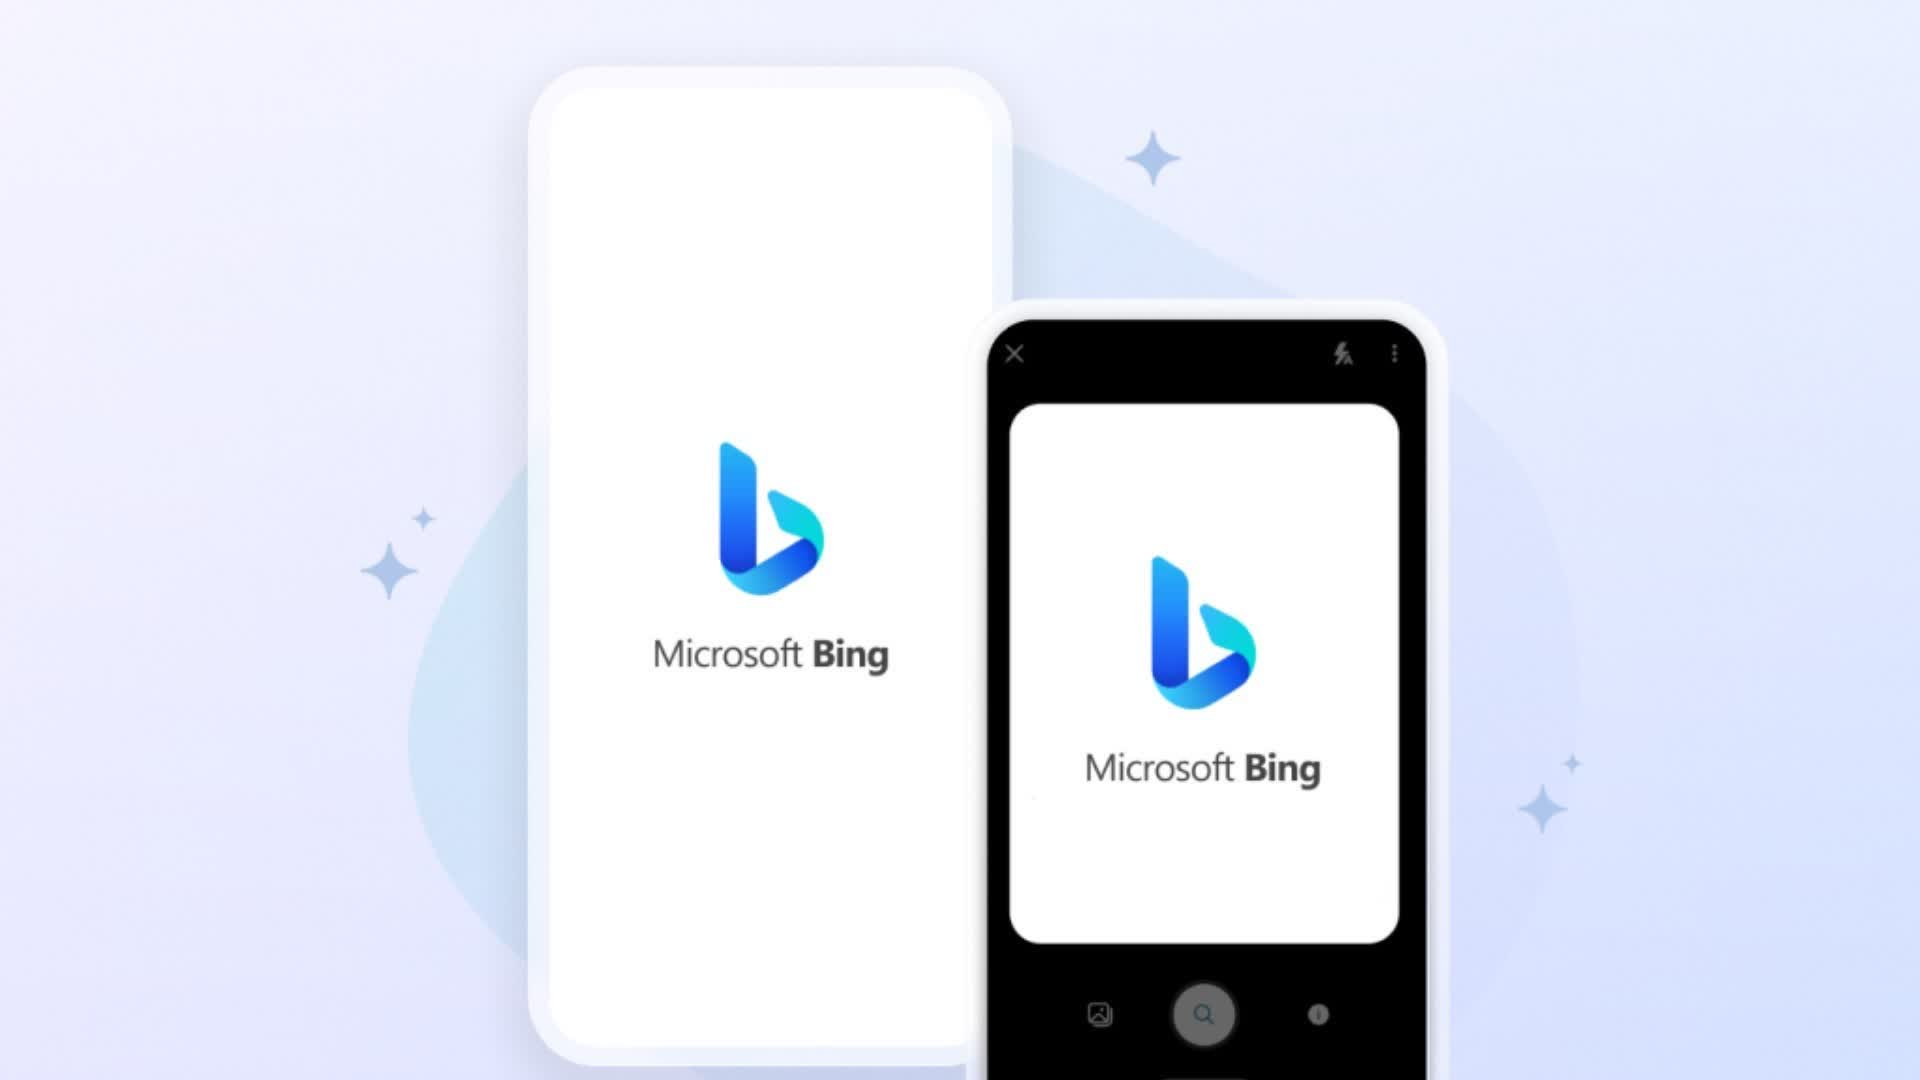 Samsung is considering switching its devices search engine from Google to Bing